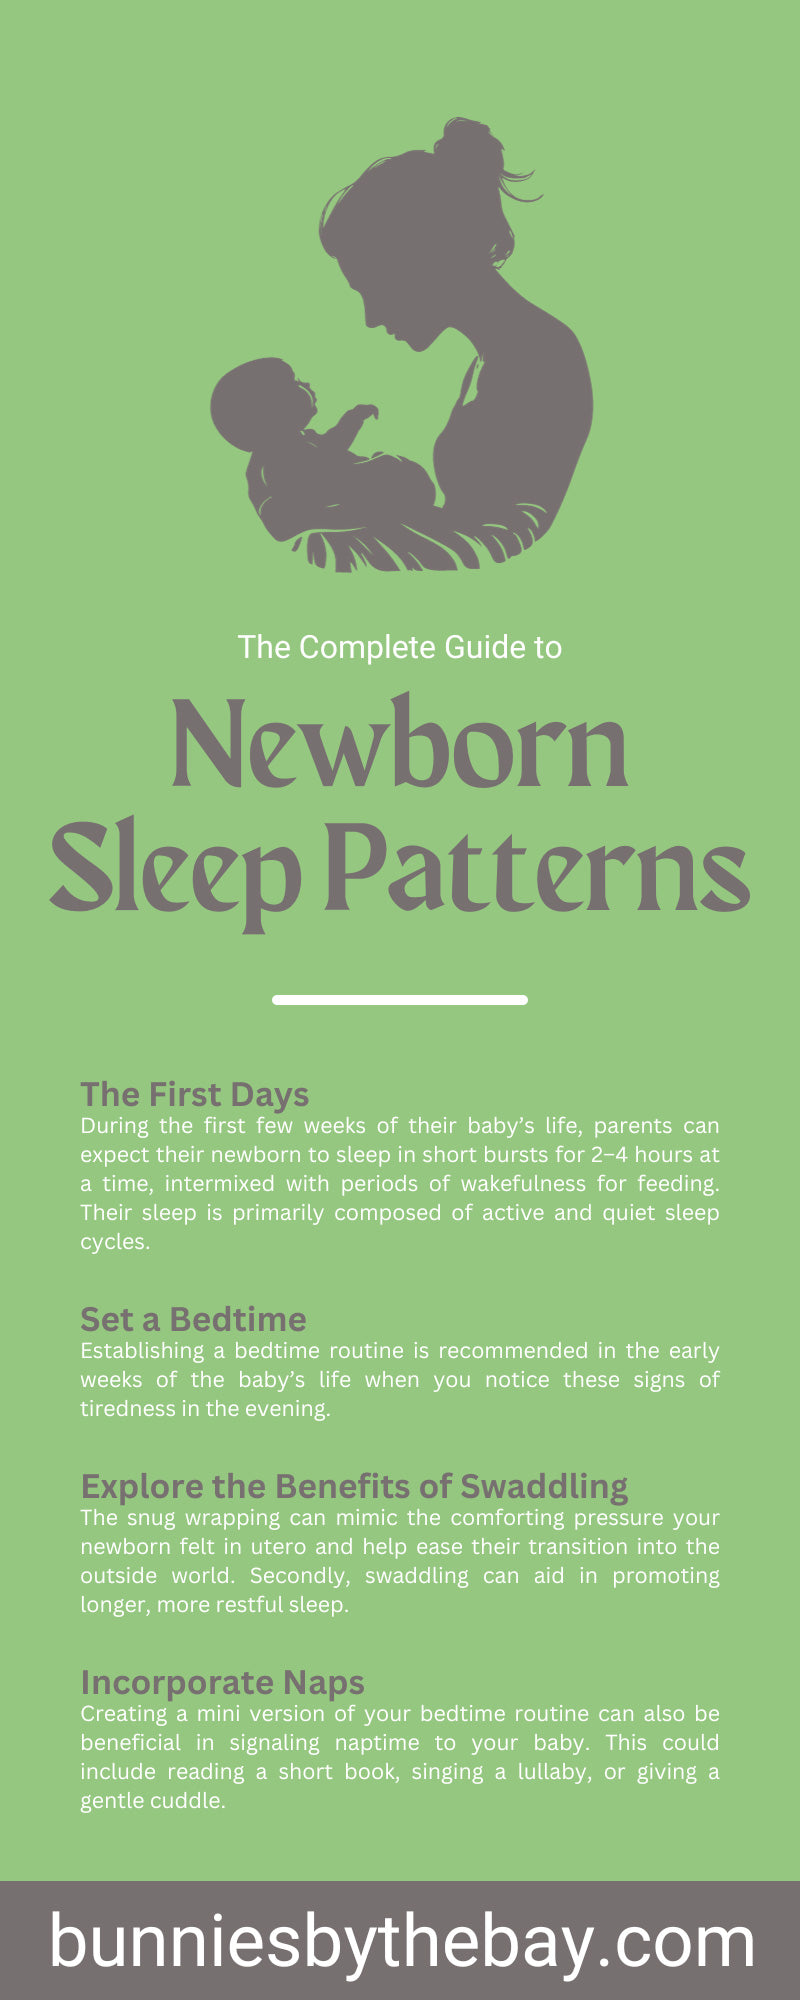 The Complete Guide to Newborn Sleep Patterns